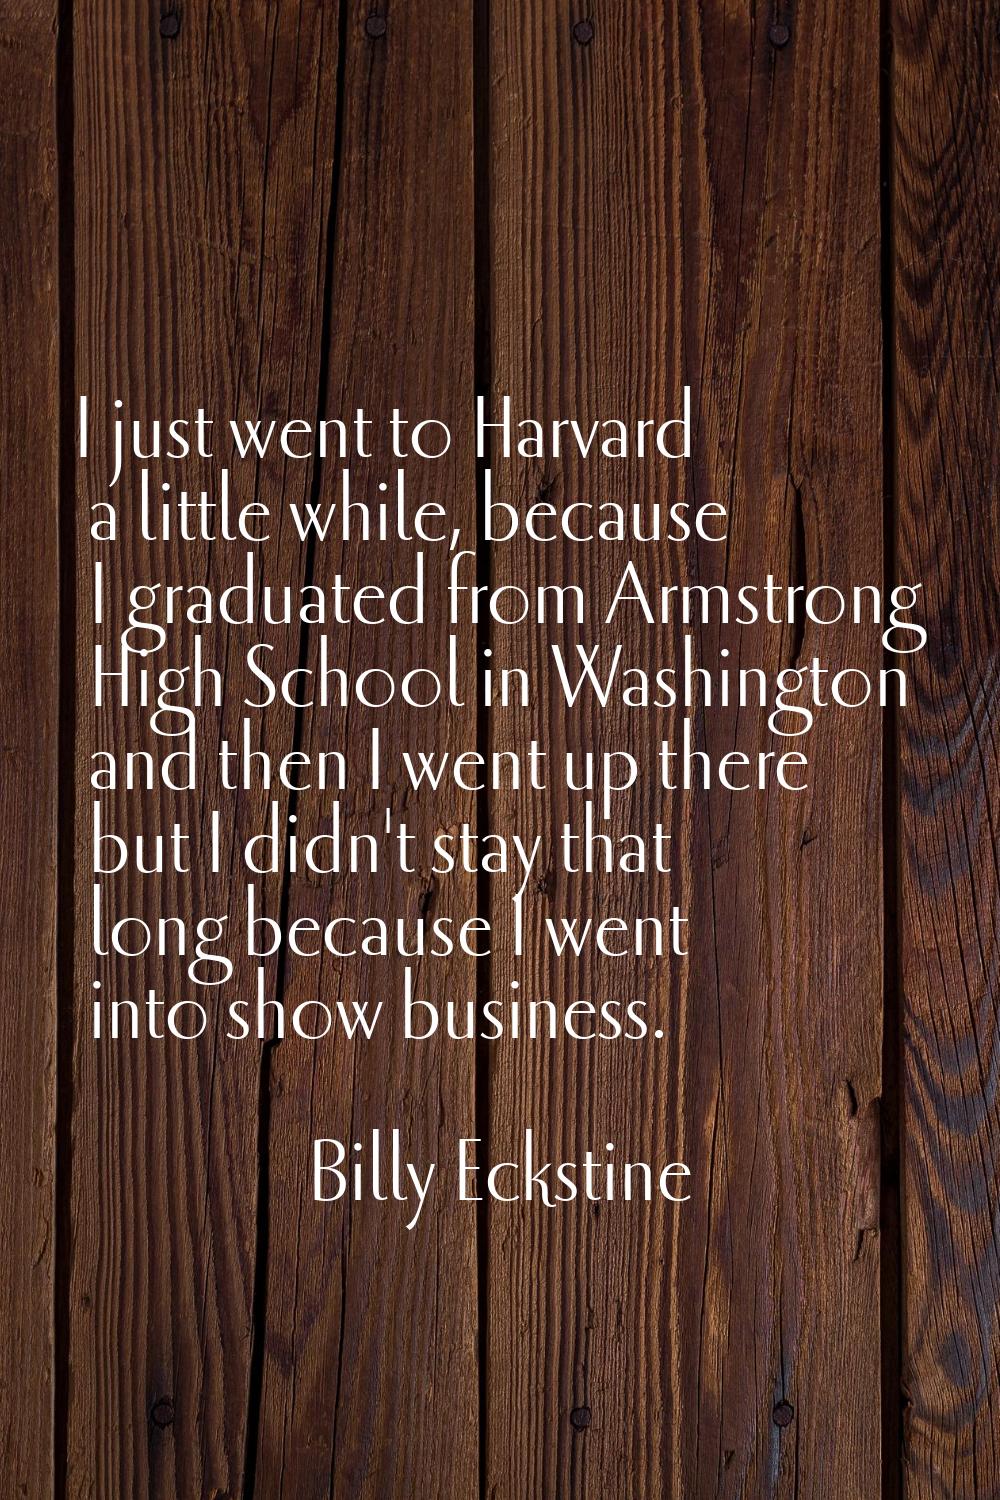 I just went to Harvard a little while, because I graduated from Armstrong High School in Washington